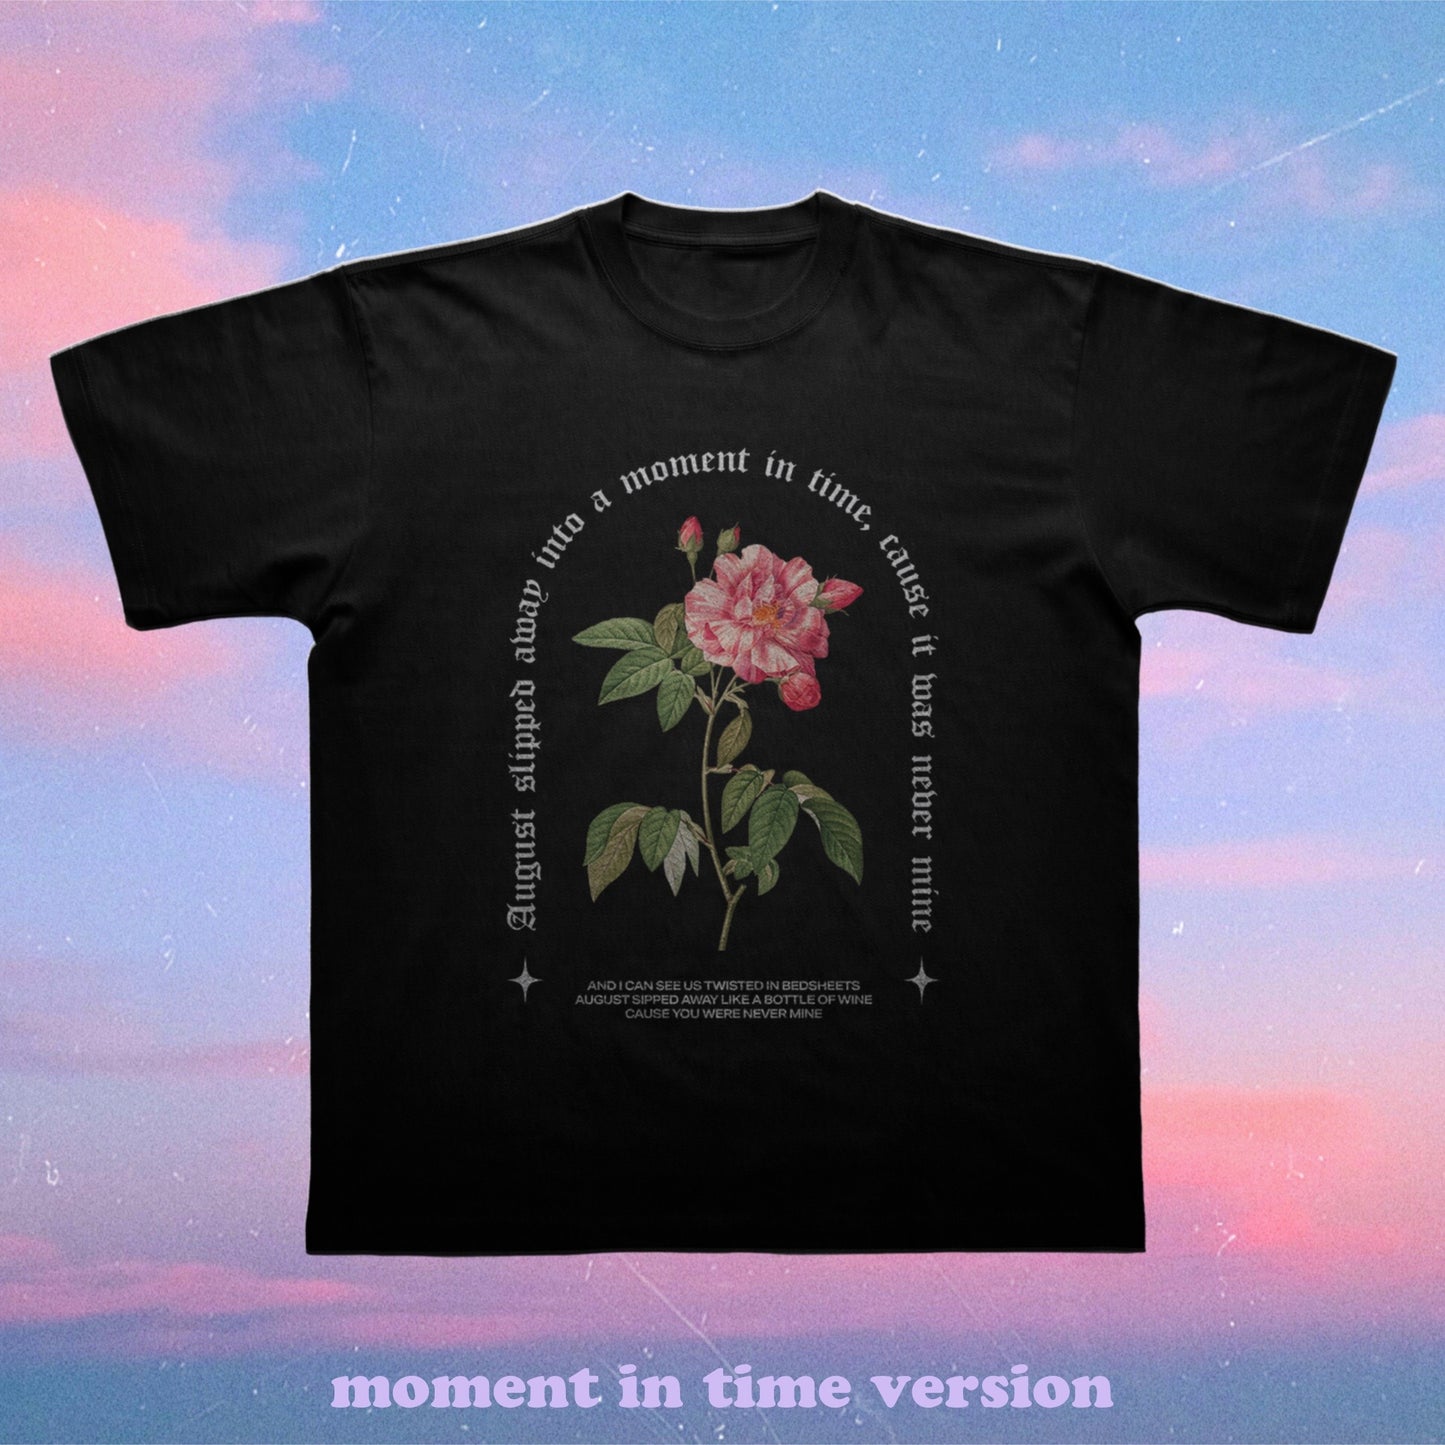 August Graphic Tee (moment in time version)